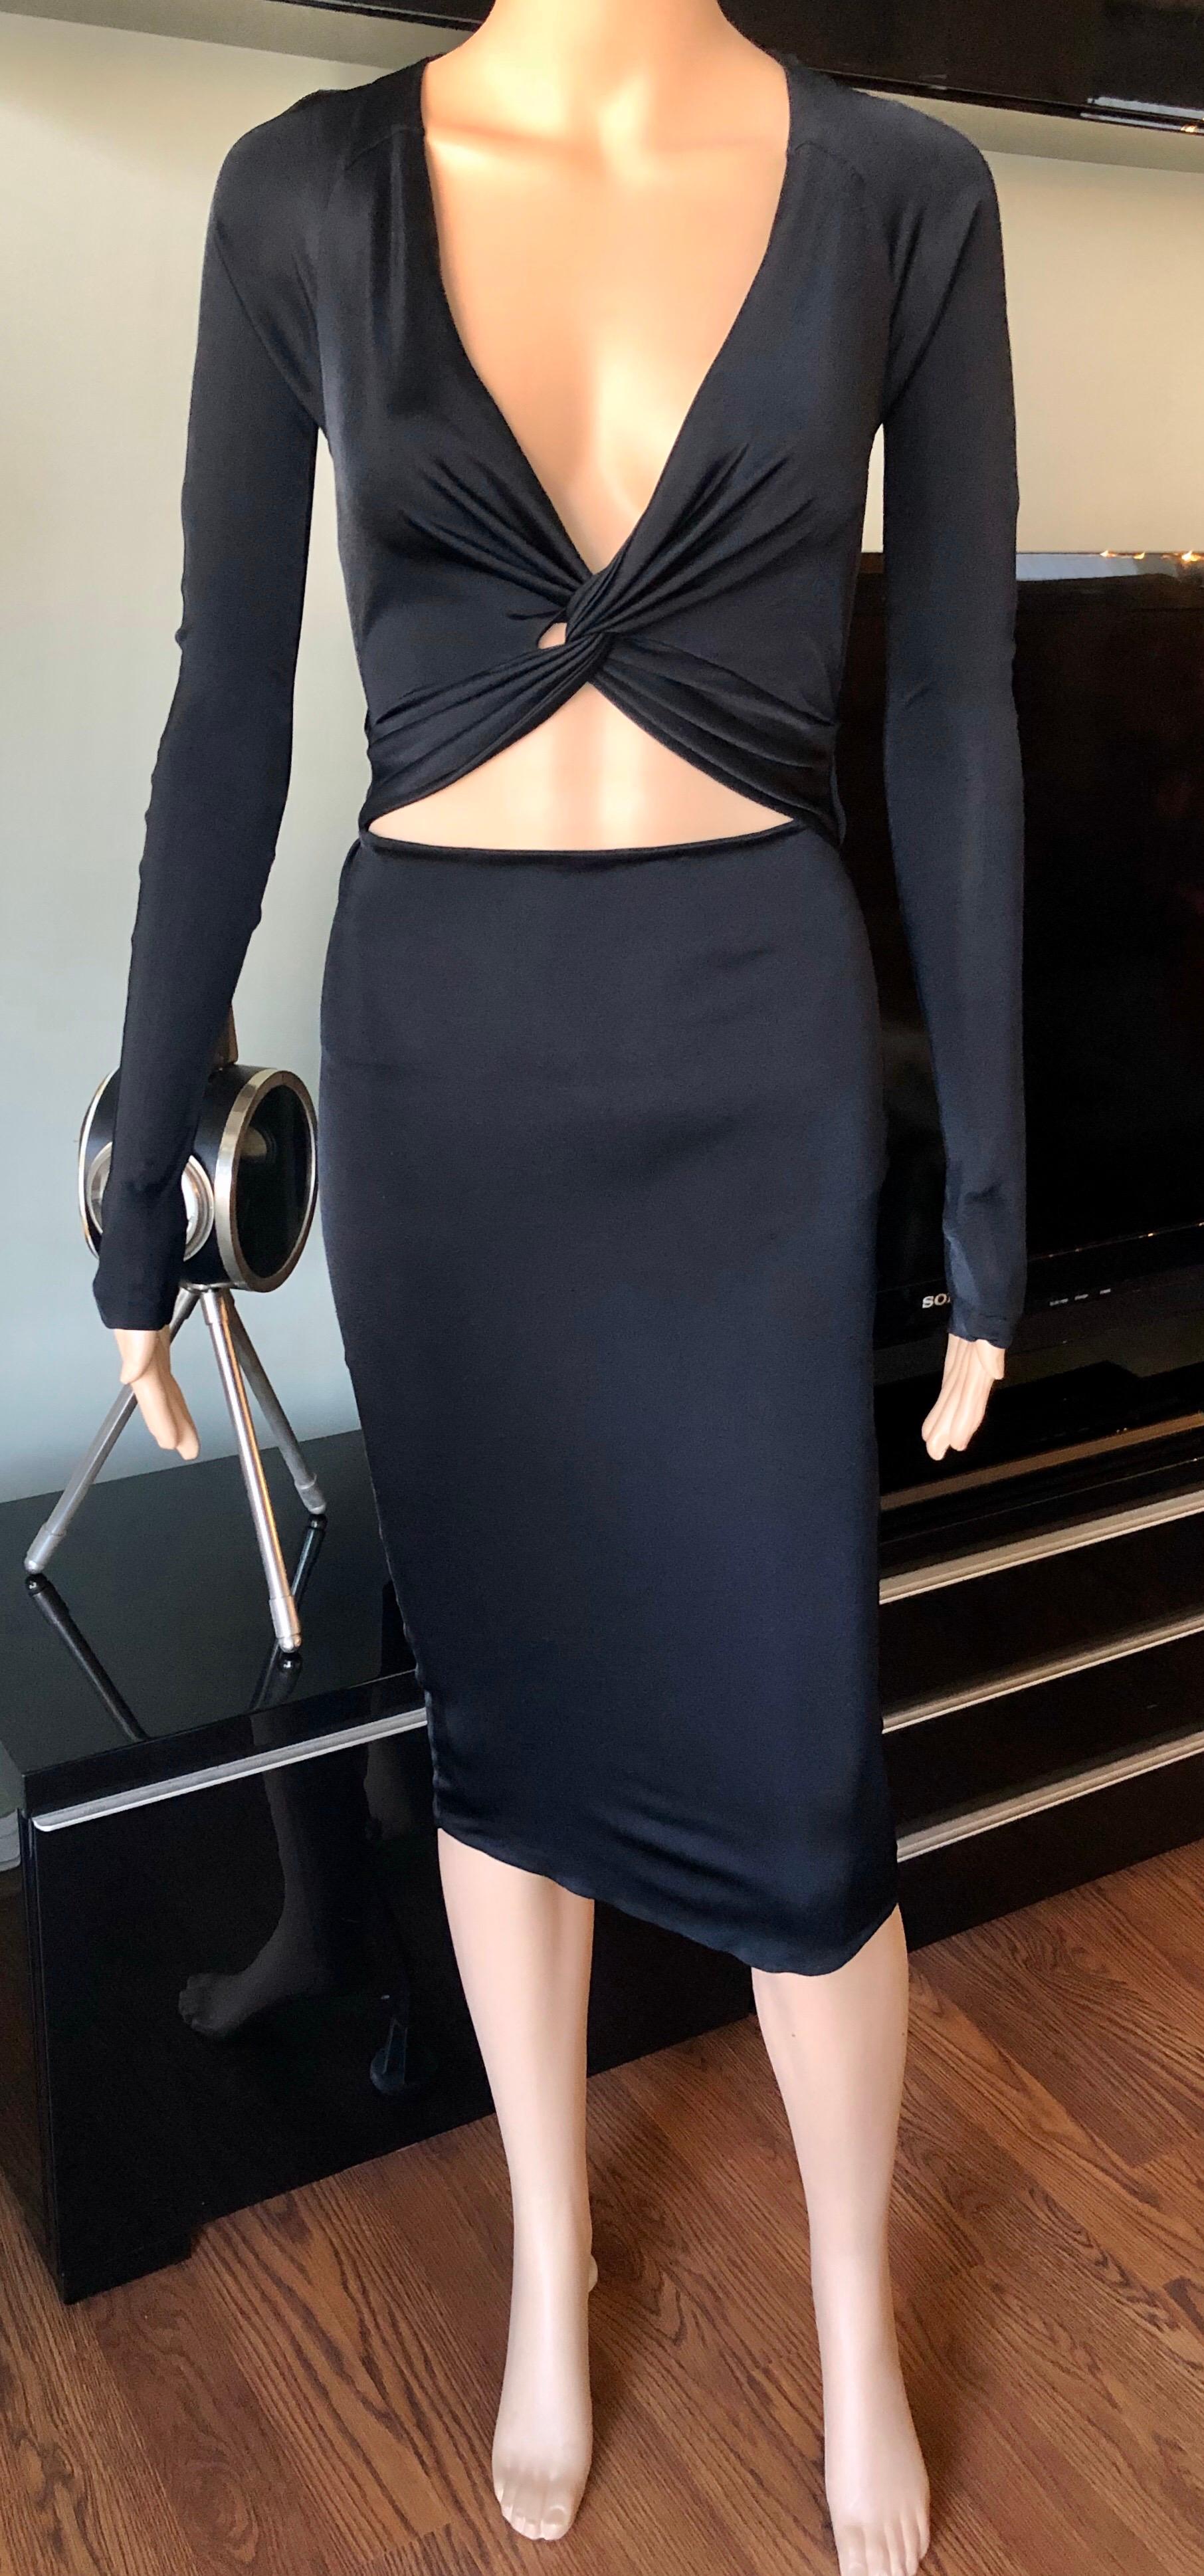 Gucci S/S 2005 Tom Ford Plunging Cutout Backless Bodycon Black Dress Unisexe en vente